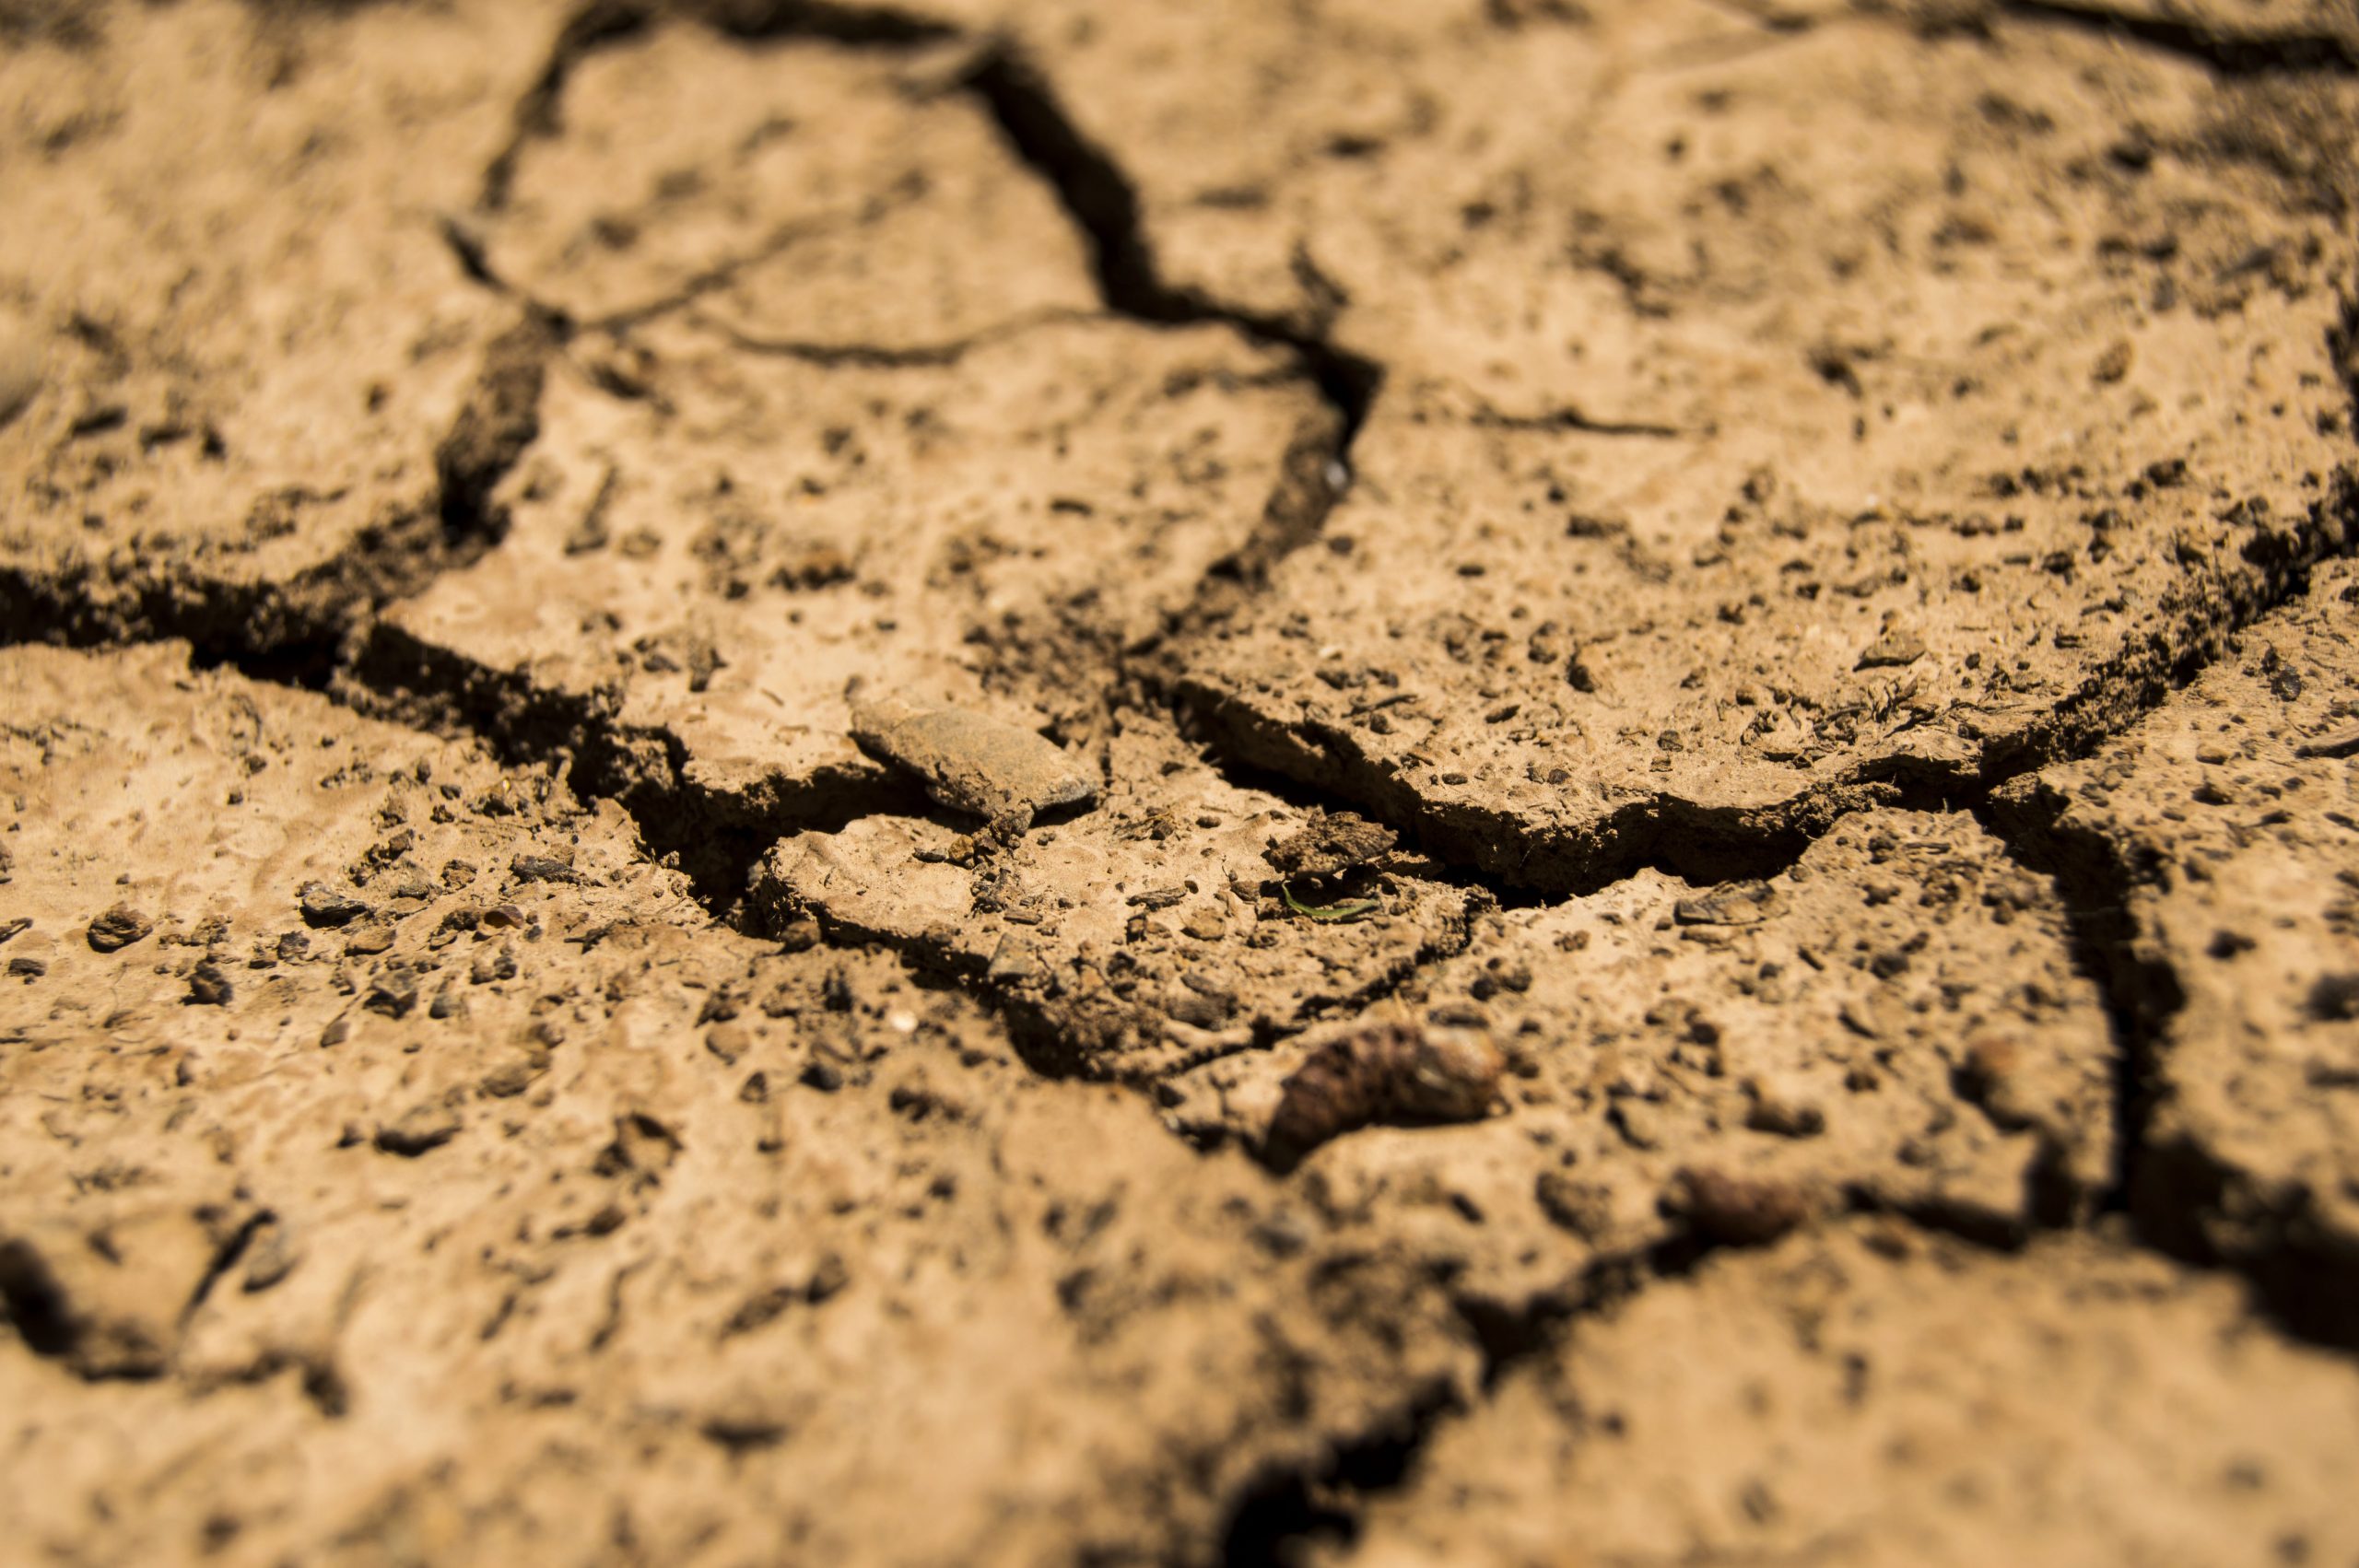 Close-up of cracked earth due to drought conditions